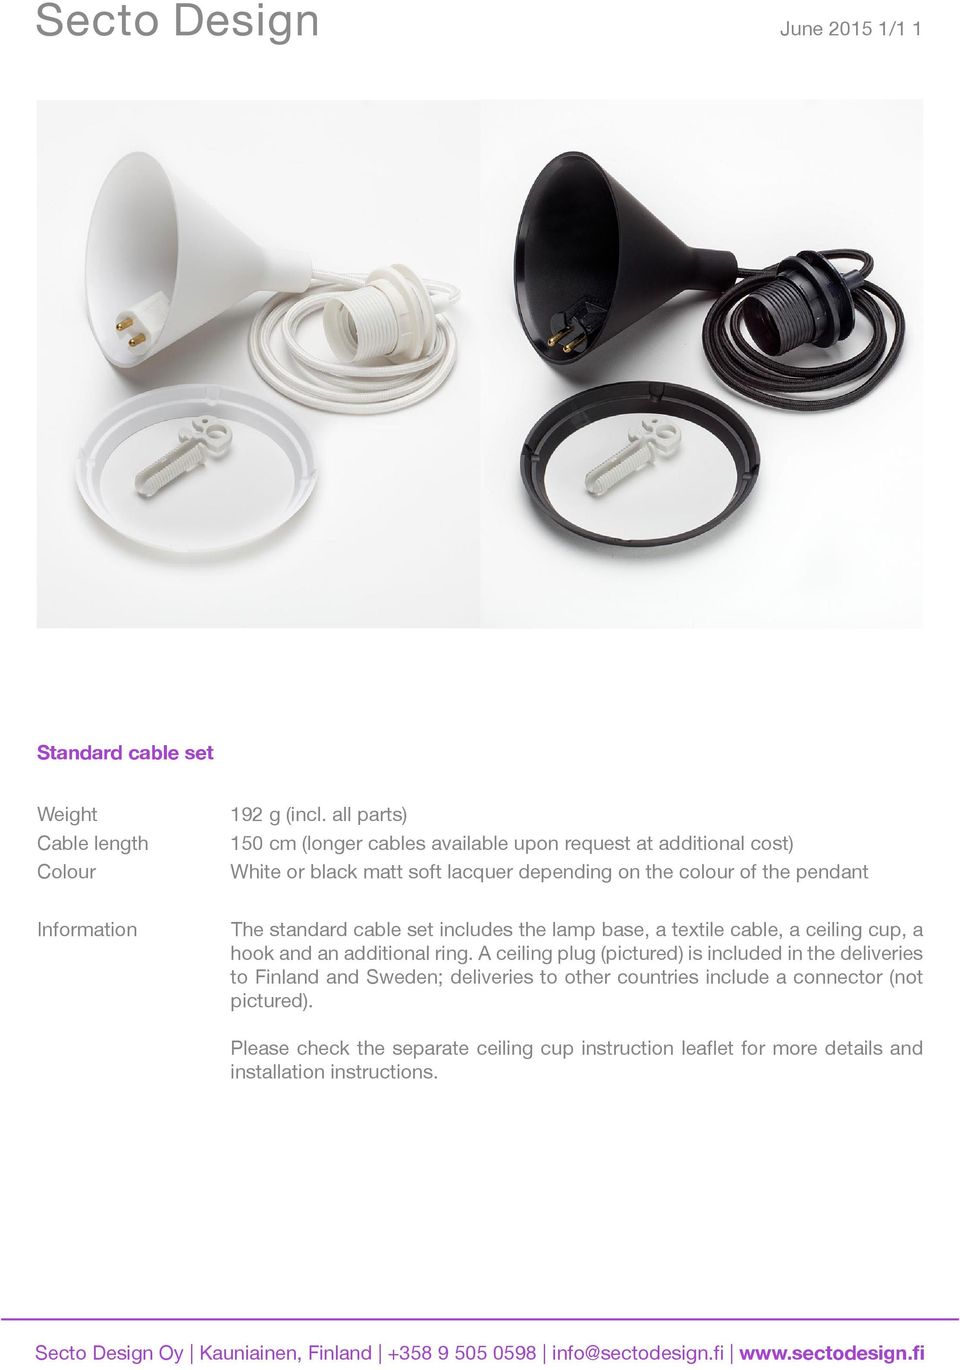 standard cable set includes the lamp base, a textile cable, a ceiling cup, a hook and an additional ring.